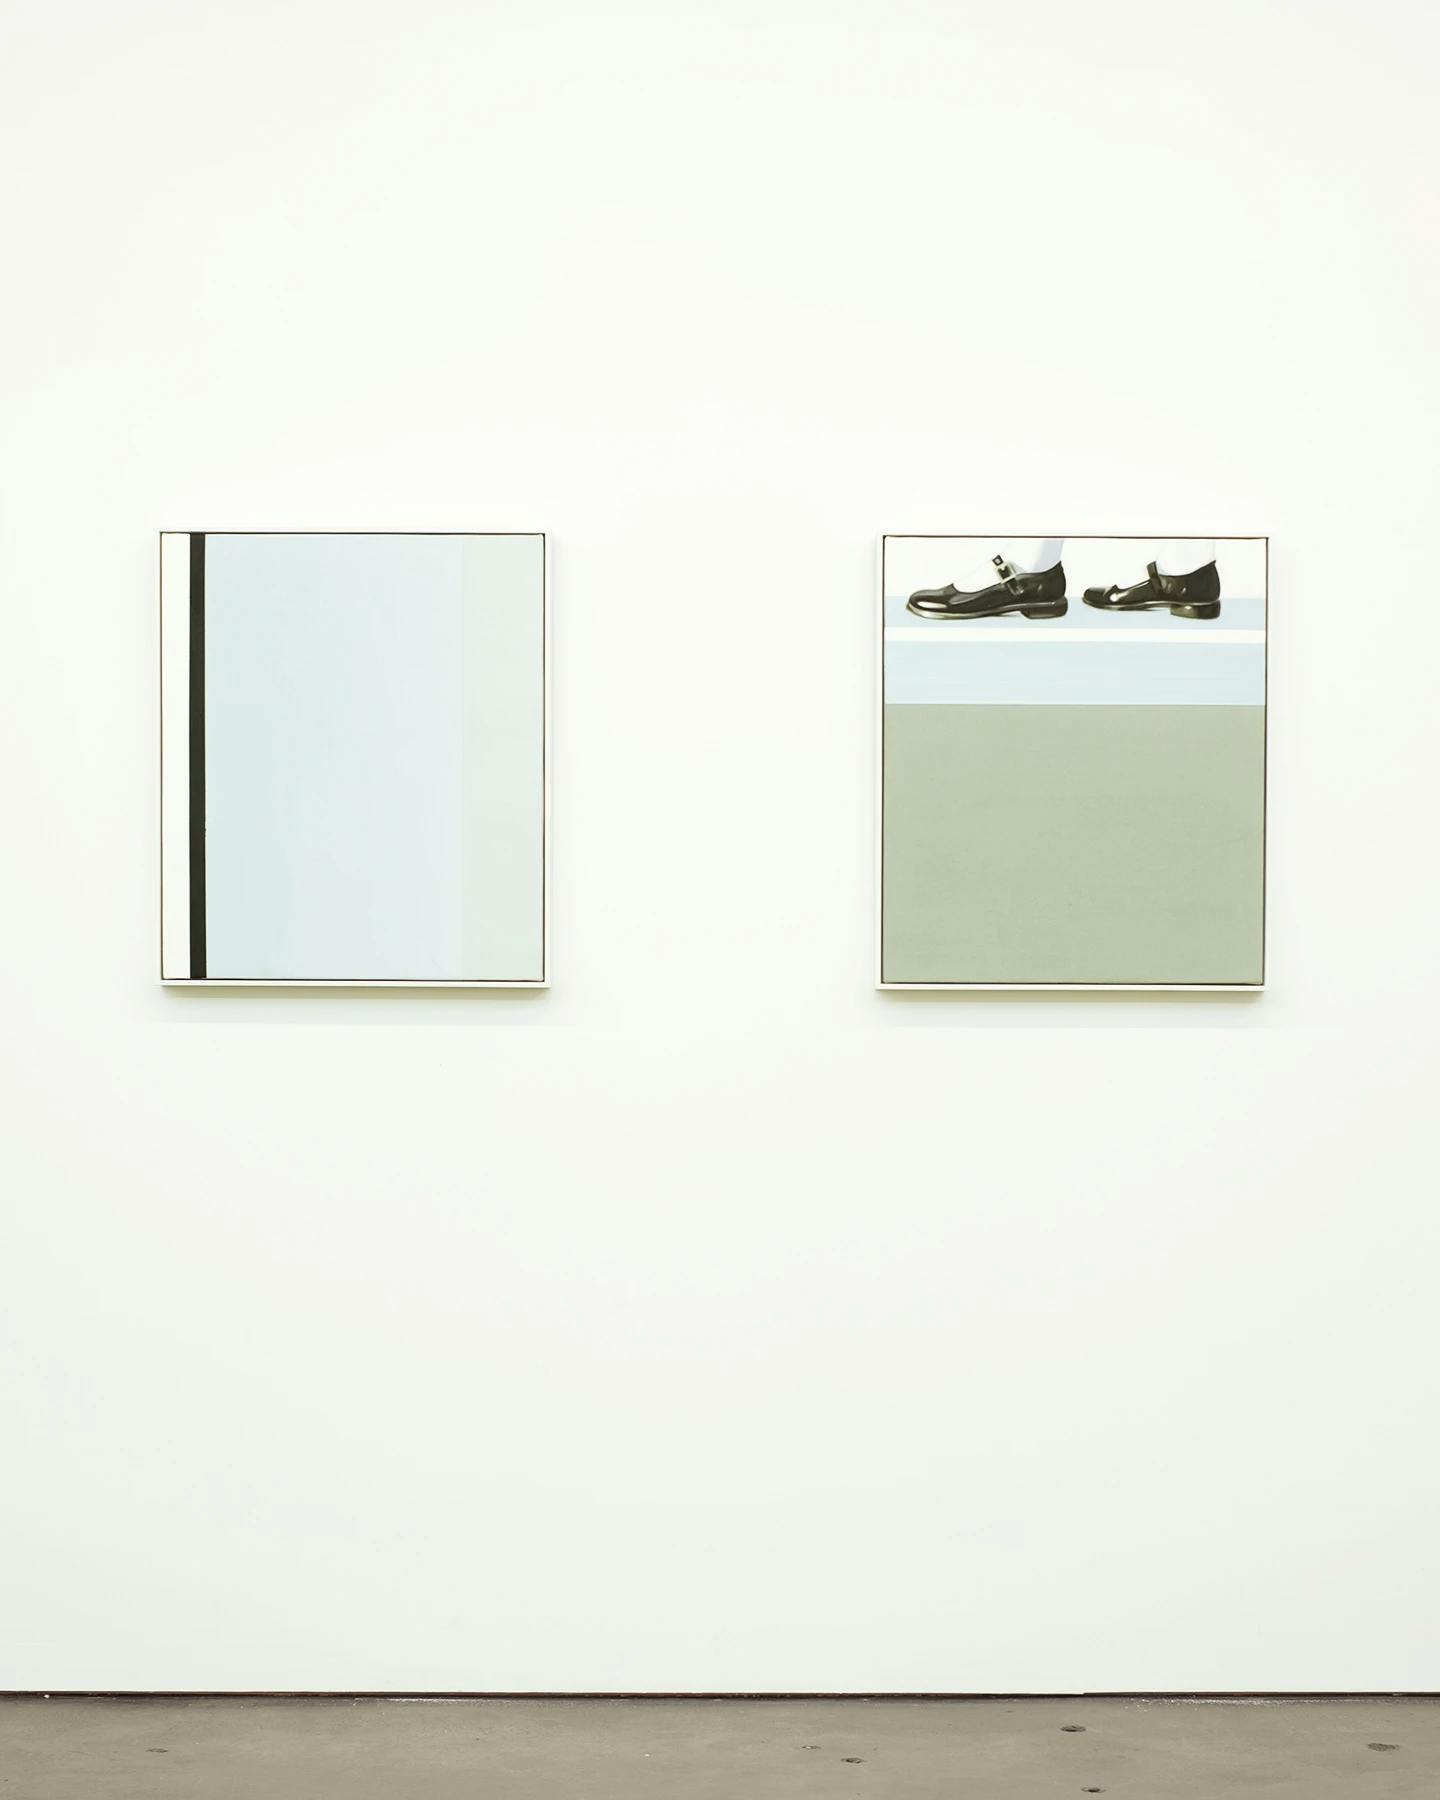 Two paintings by artist Bryce Anderson, one minimalist one and one with black shoes, installed next to each other on a white wall.